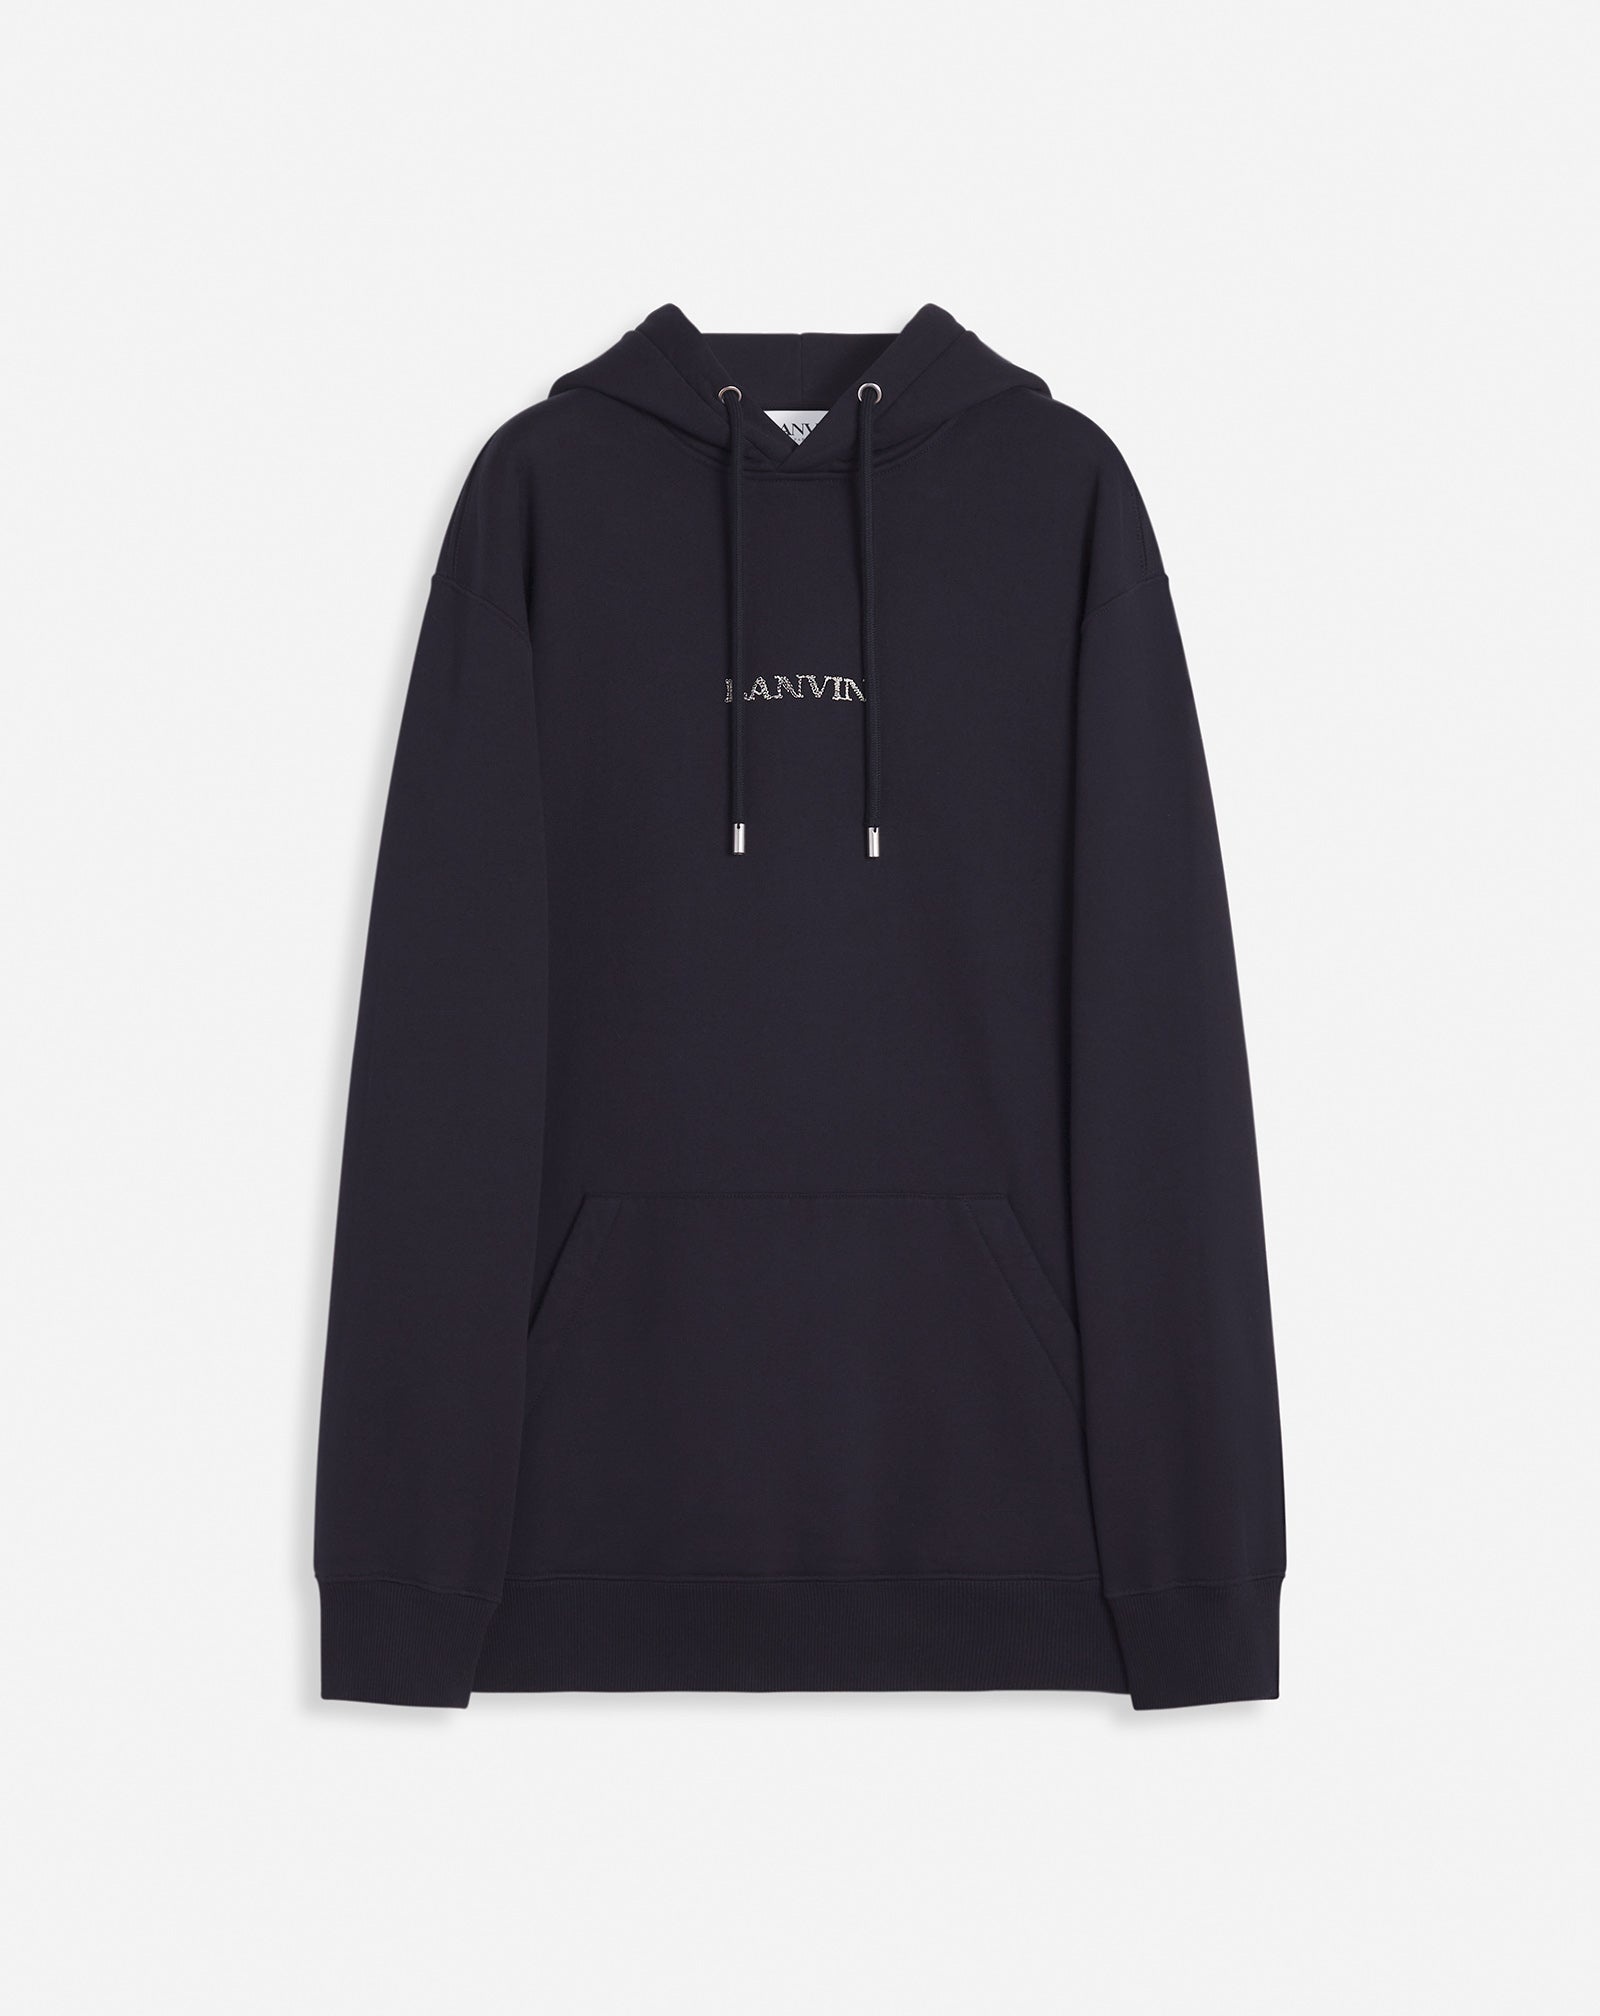 LOOSE-FITTING HOODIE WITH LANVIN LOGO - 1